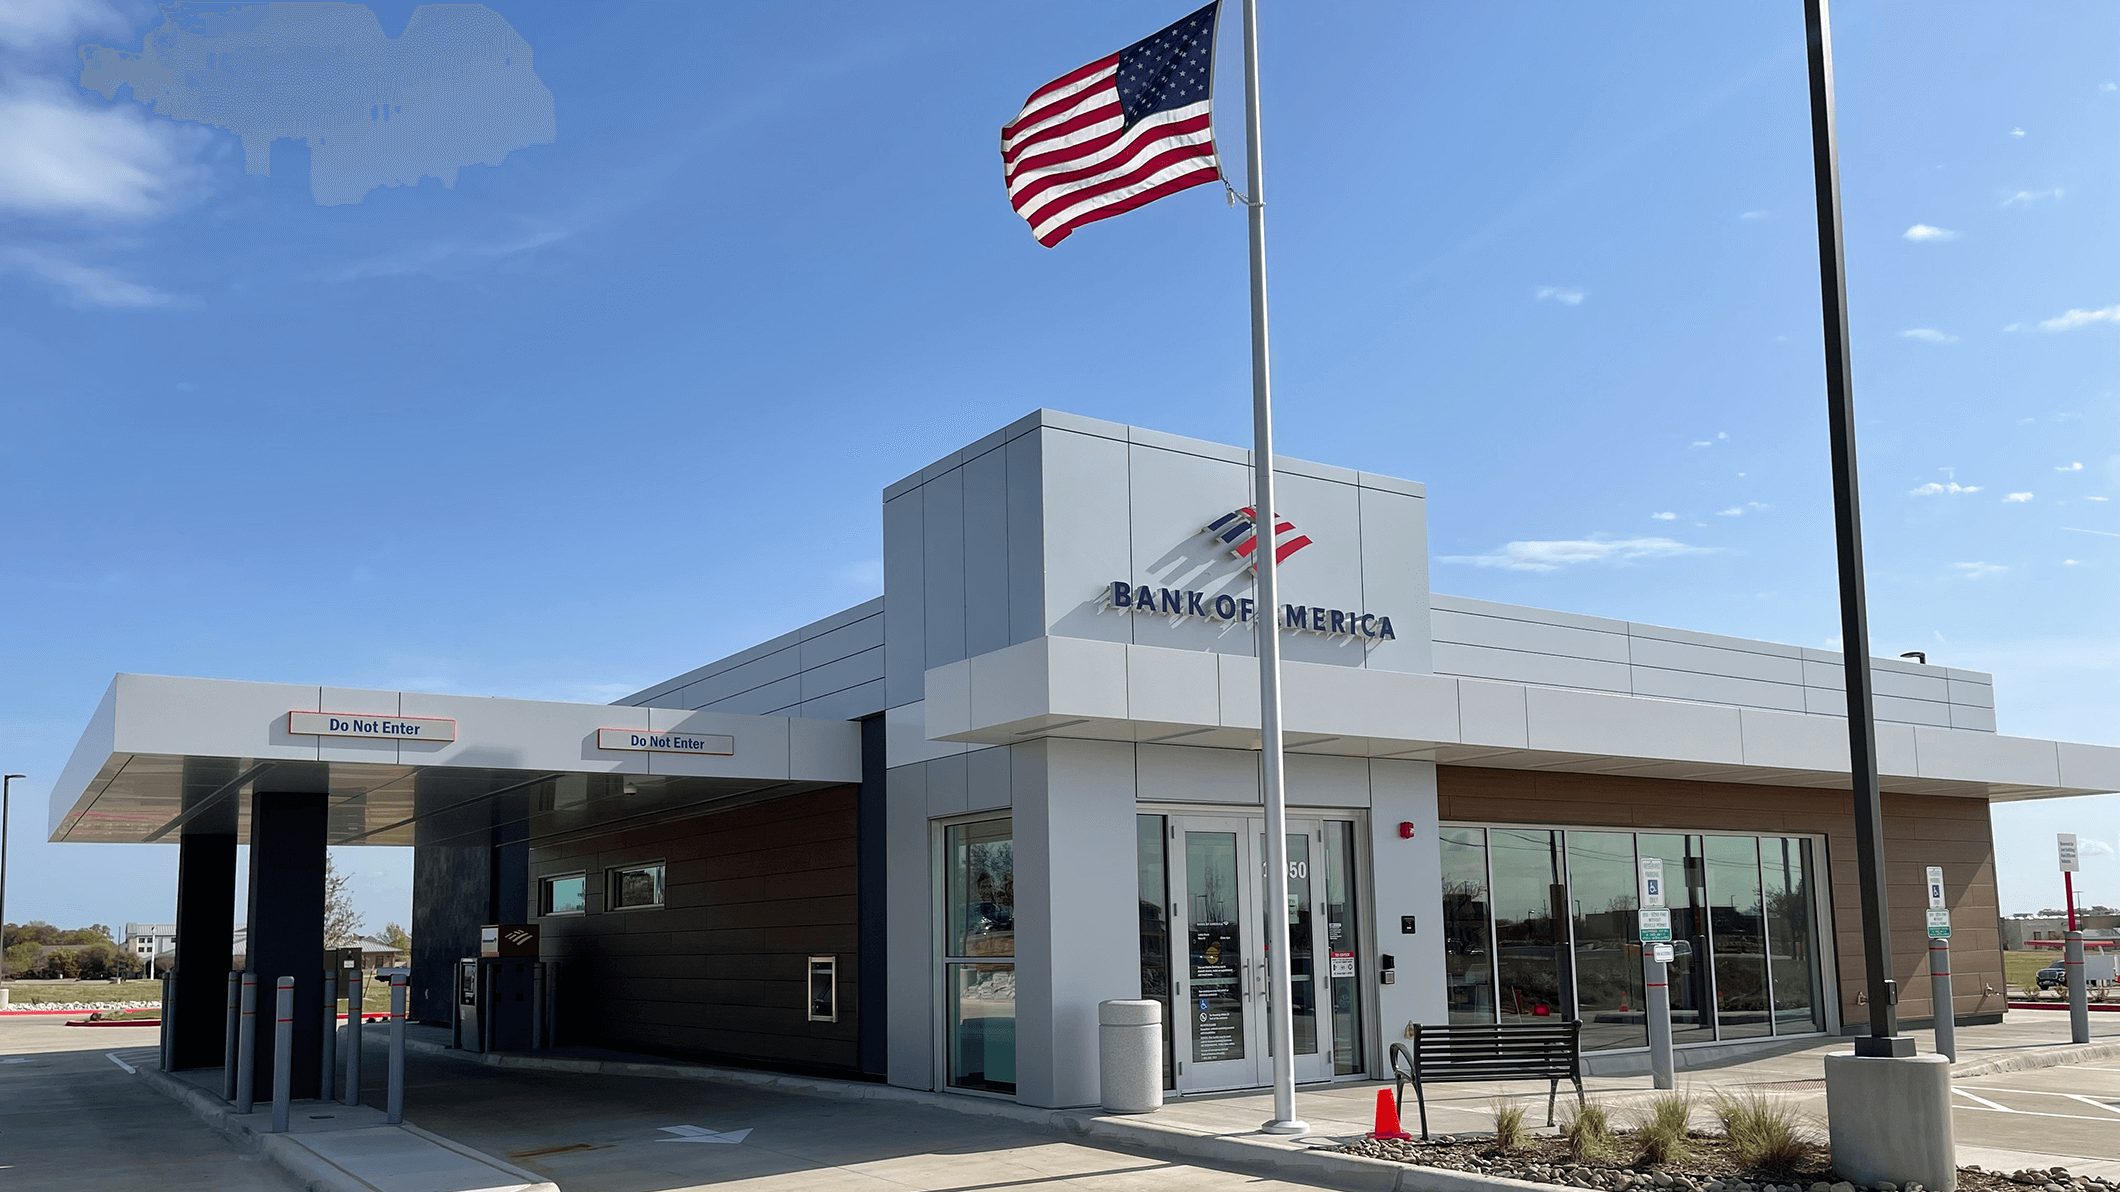 Bank of America financial center with drive-thru ATM | 11050 US Highway 380, Cross Roads, TX 76227